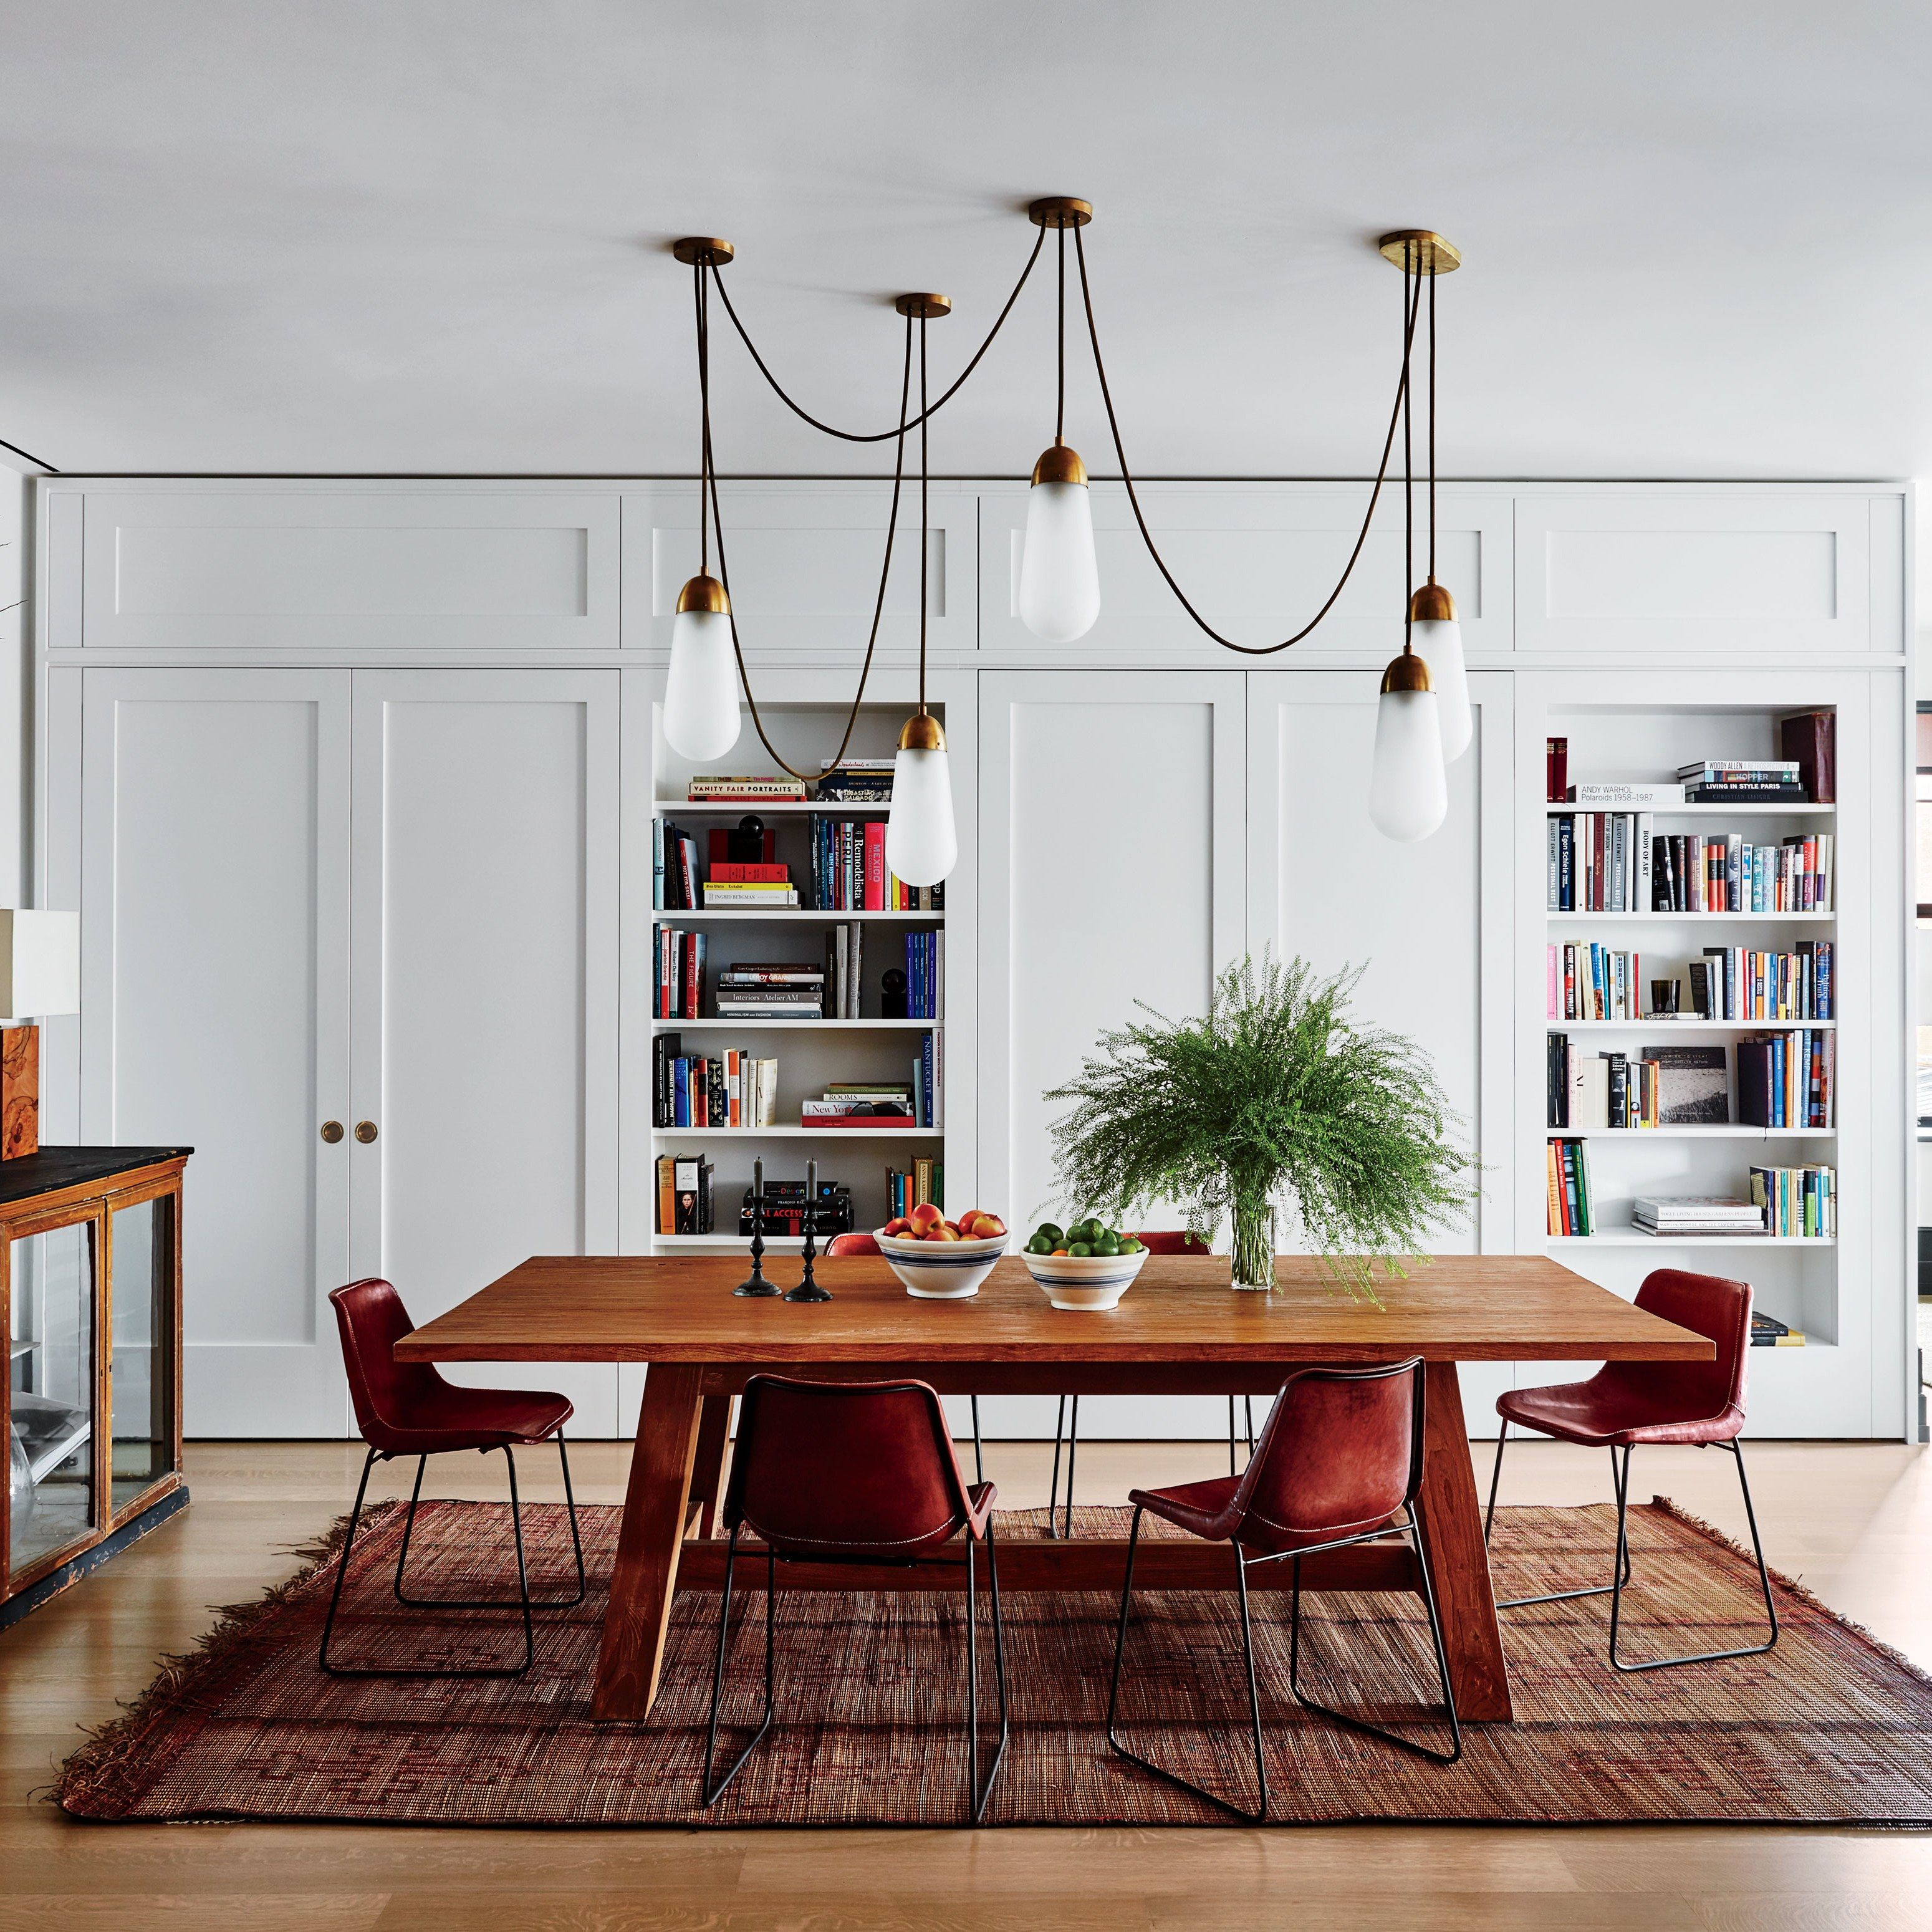 Step Inside 47 Celebrity Dining Rooms | Architectural Digest With Regard To Newest West Hill Family Table 3 Piece Dining Sets (View 12 of 20)